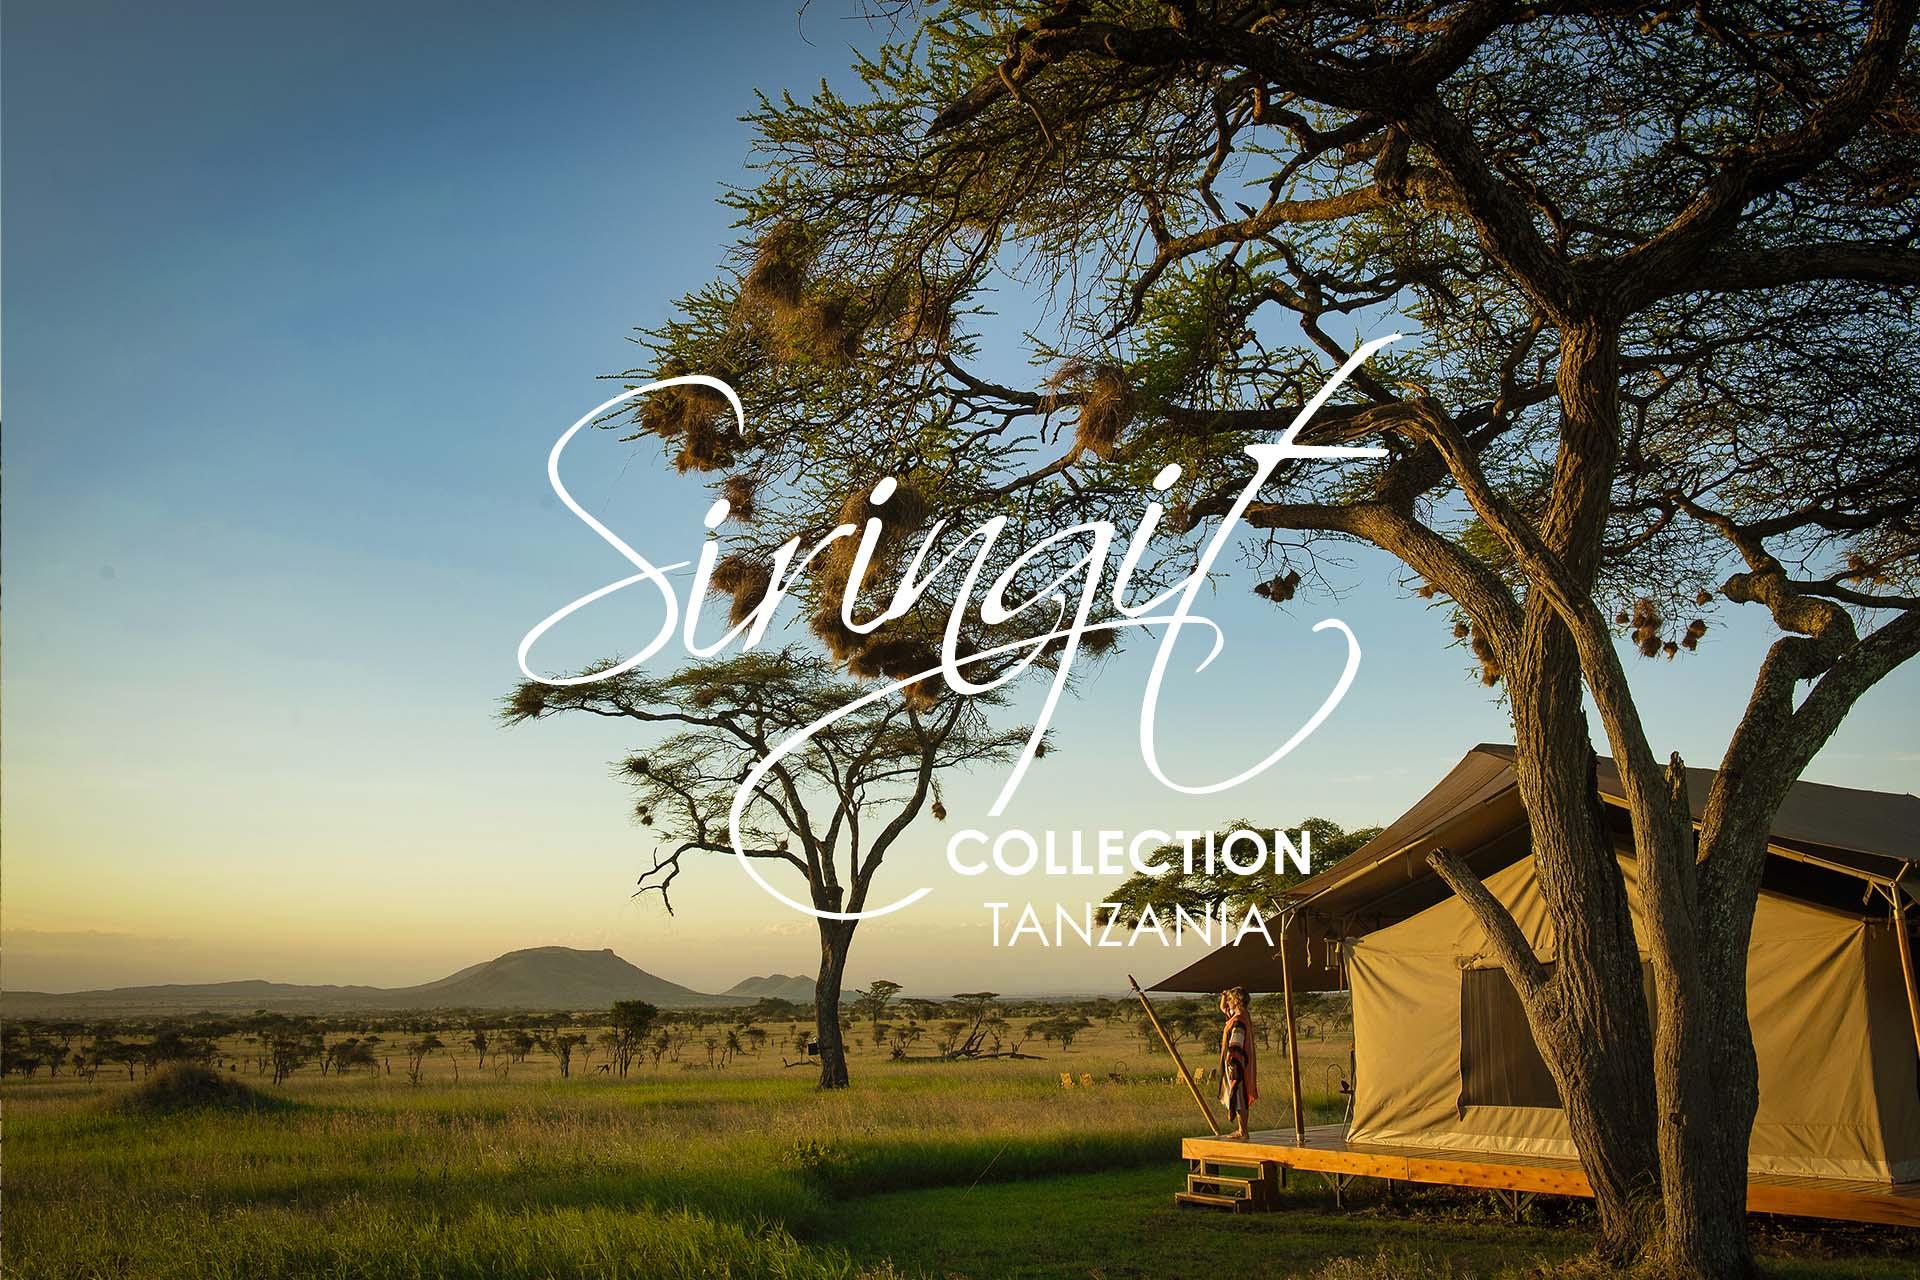 10% discount at the Siringit Collection